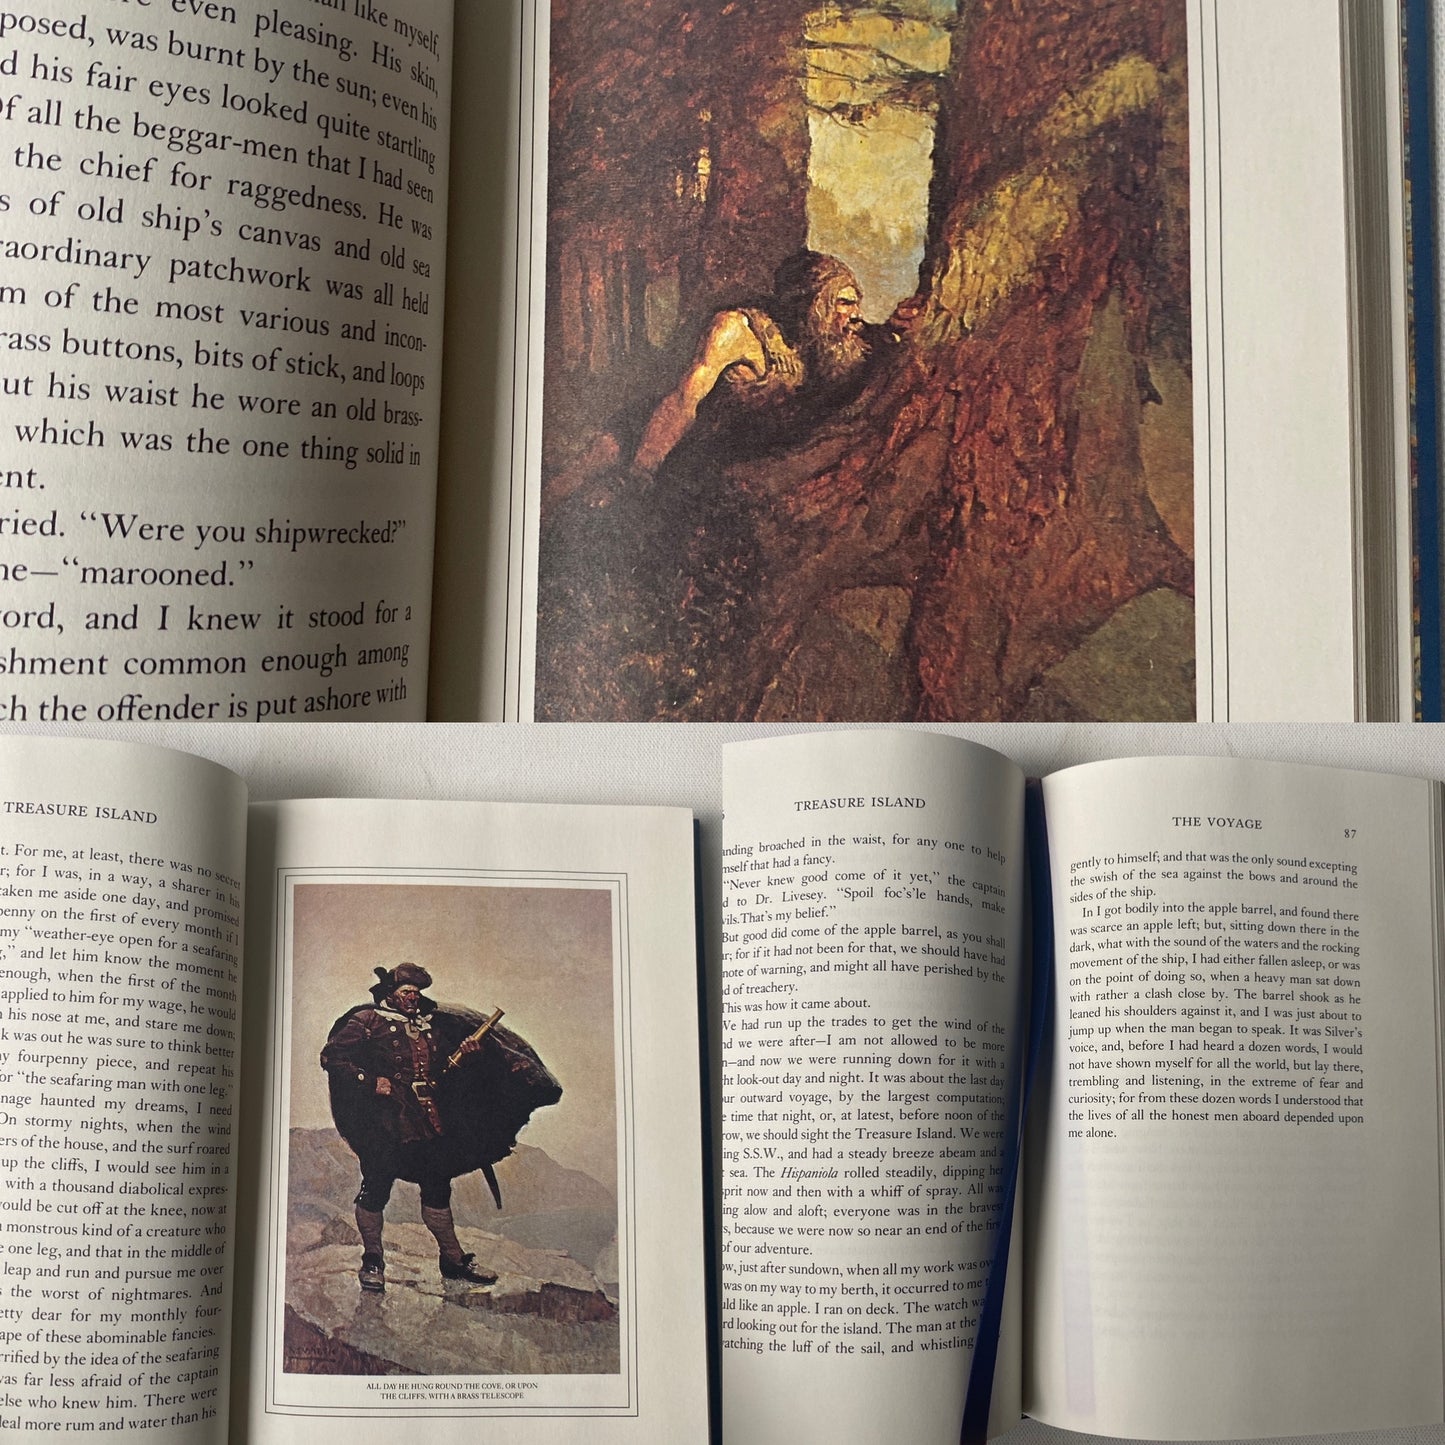 Treasure Island By Robert Louis Stevenson, The Franklin Library, with N.C. Wyeth illustrations